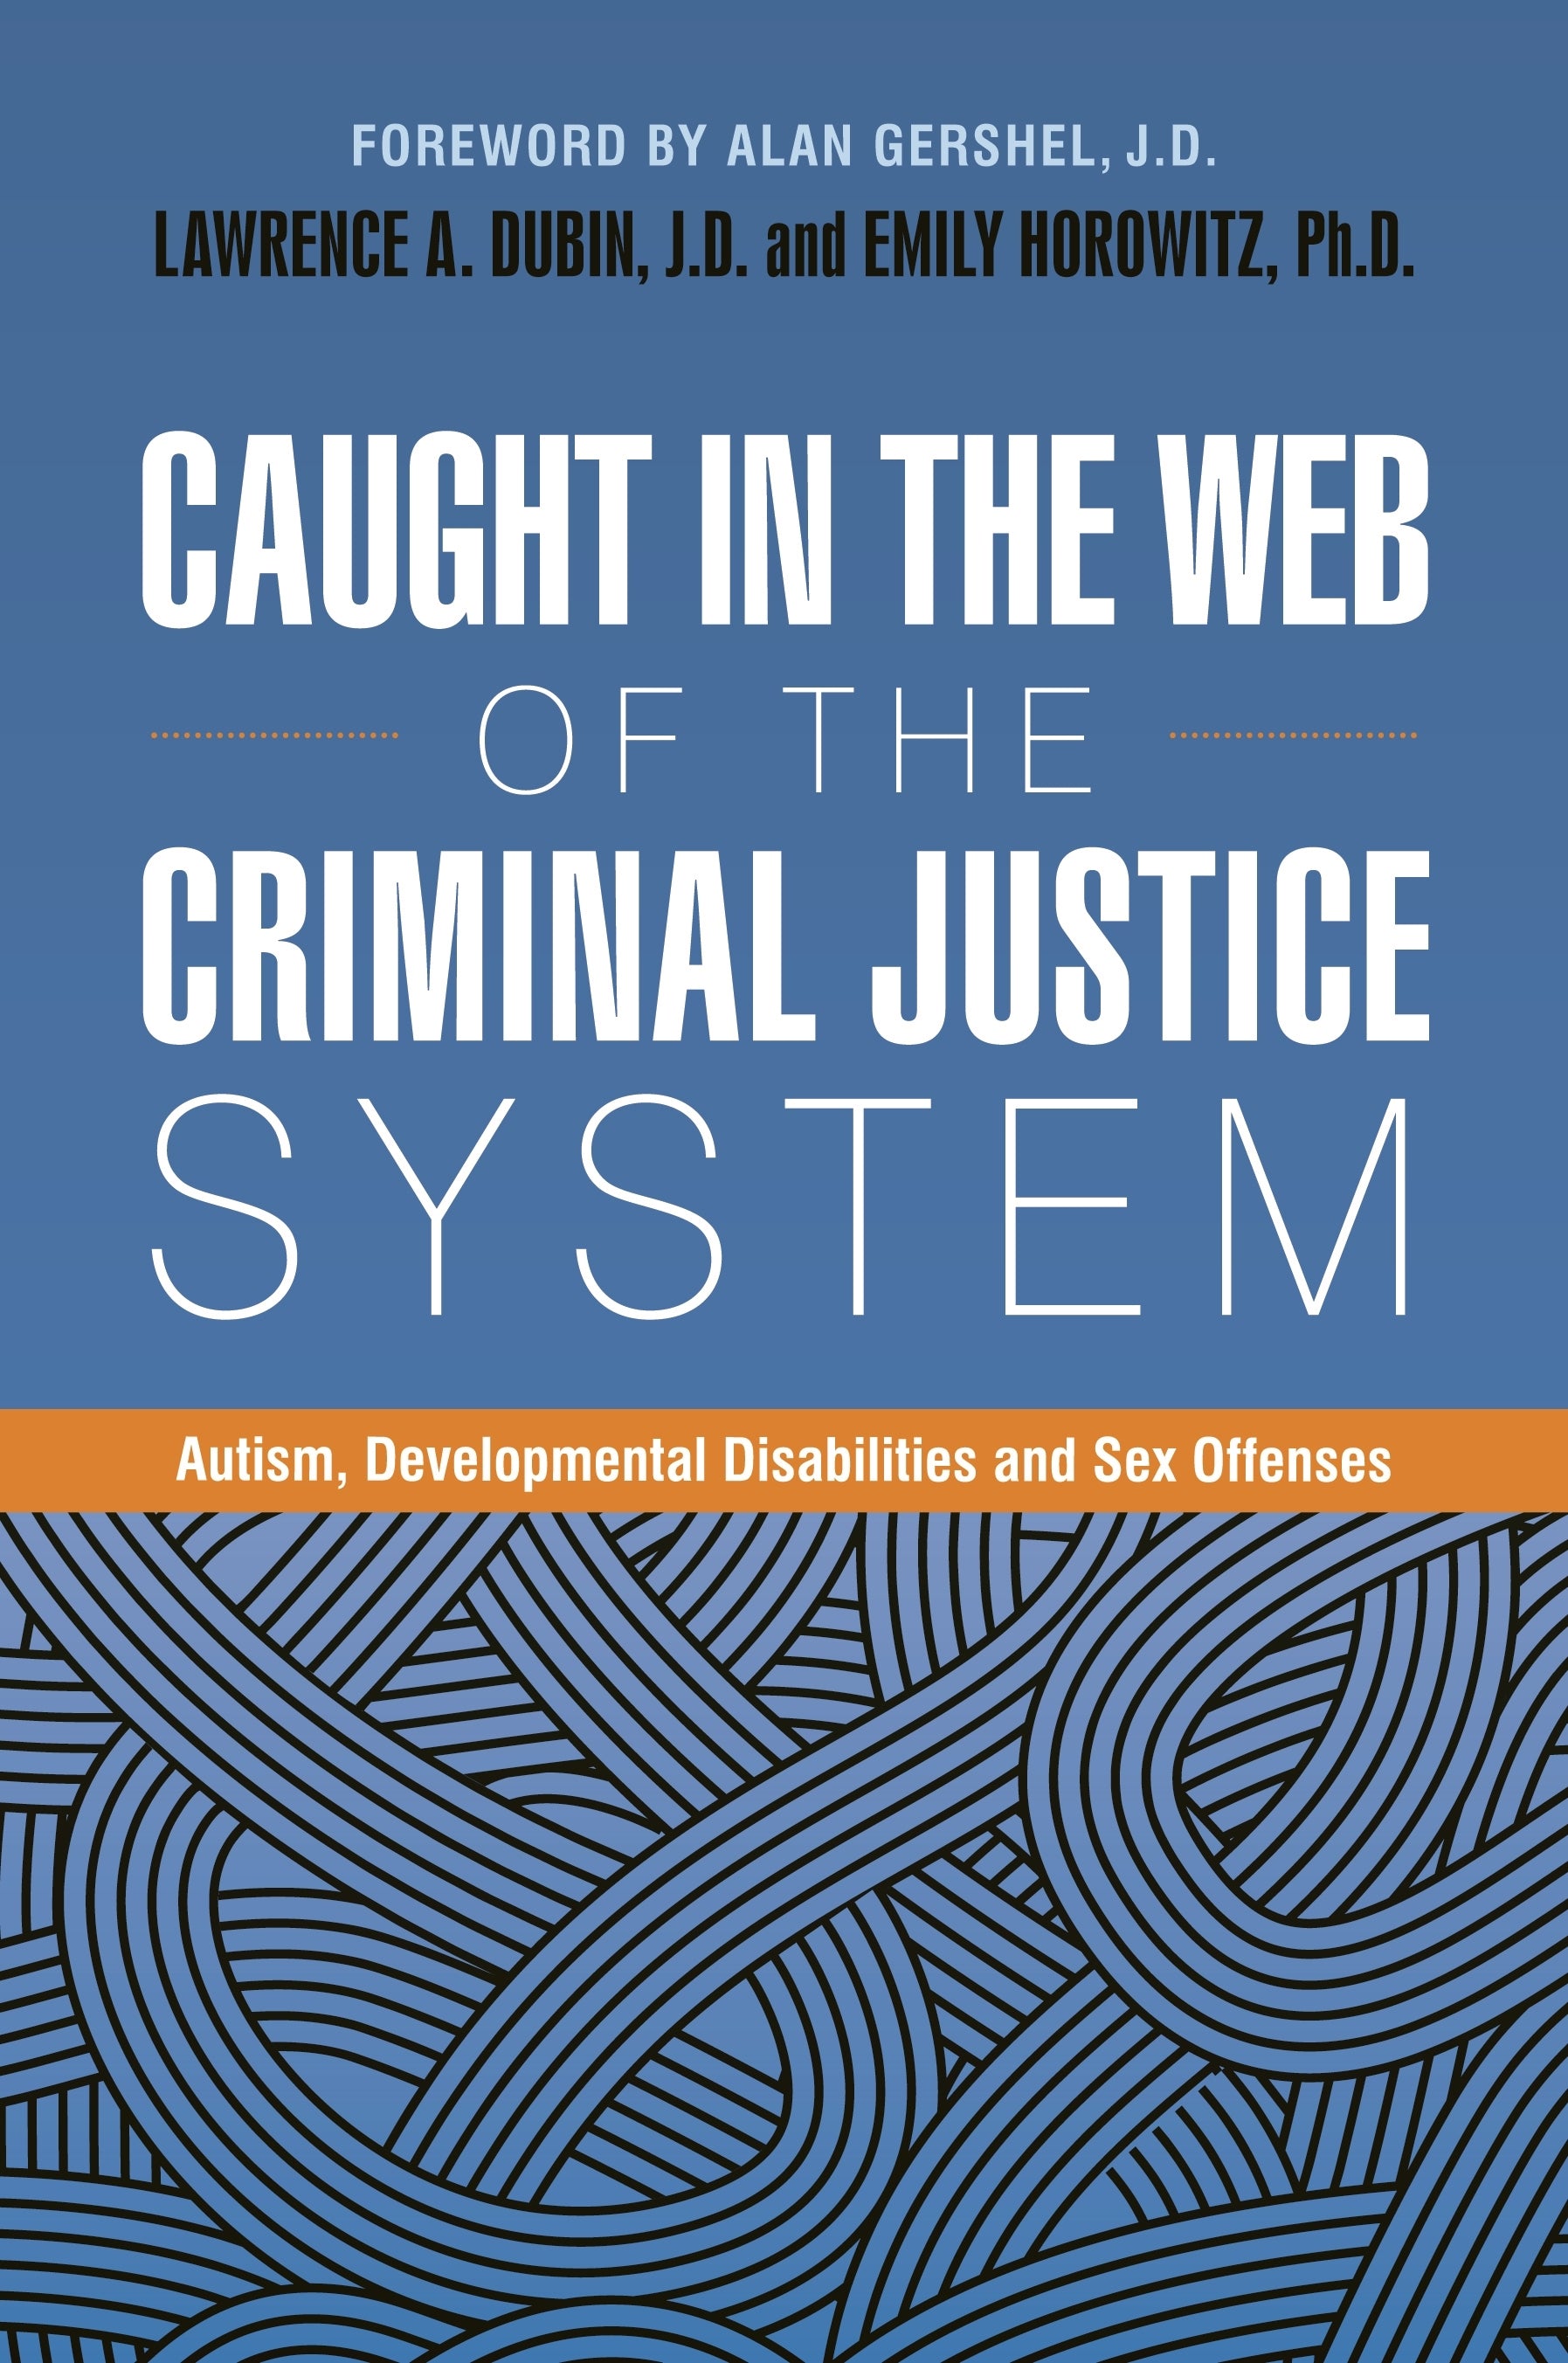 Caught in the Web of the Criminal Justice System by Lawrence A. Dubin, J.D., Emily Horowitz, Ph.D., Alan Gershel, Dr Anthony Attwood, No Author Listed